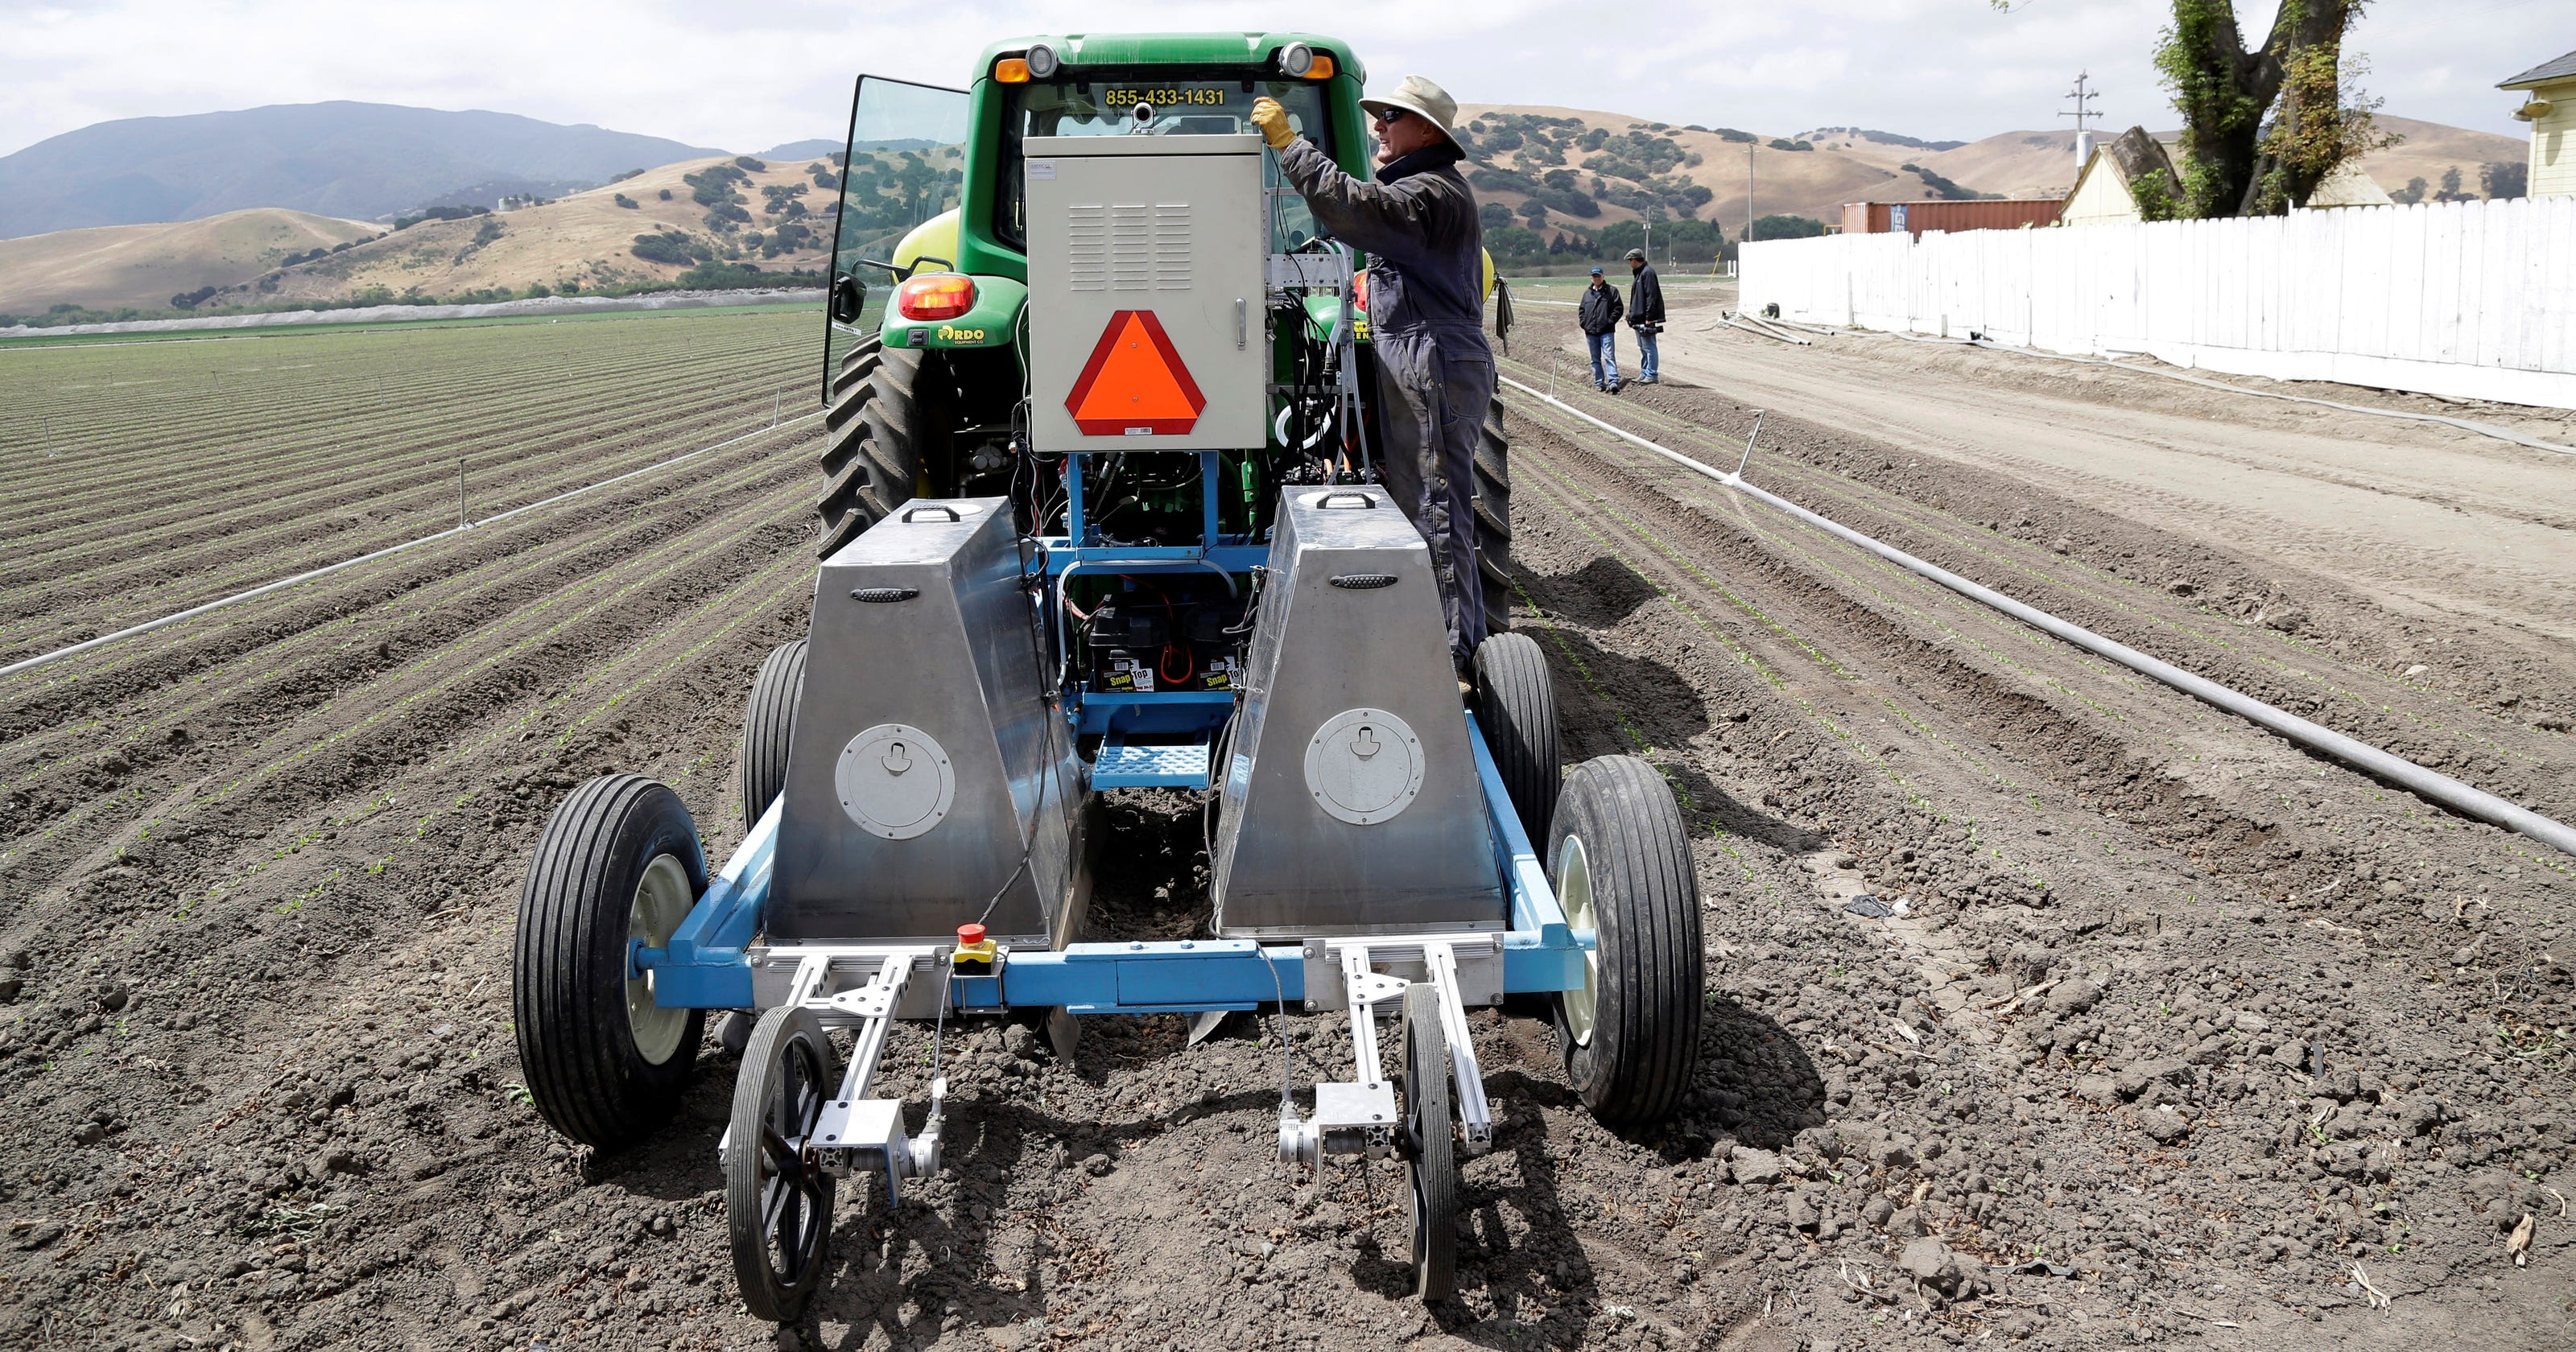 Robots To Revolutionize Farming Ease Labor Woes